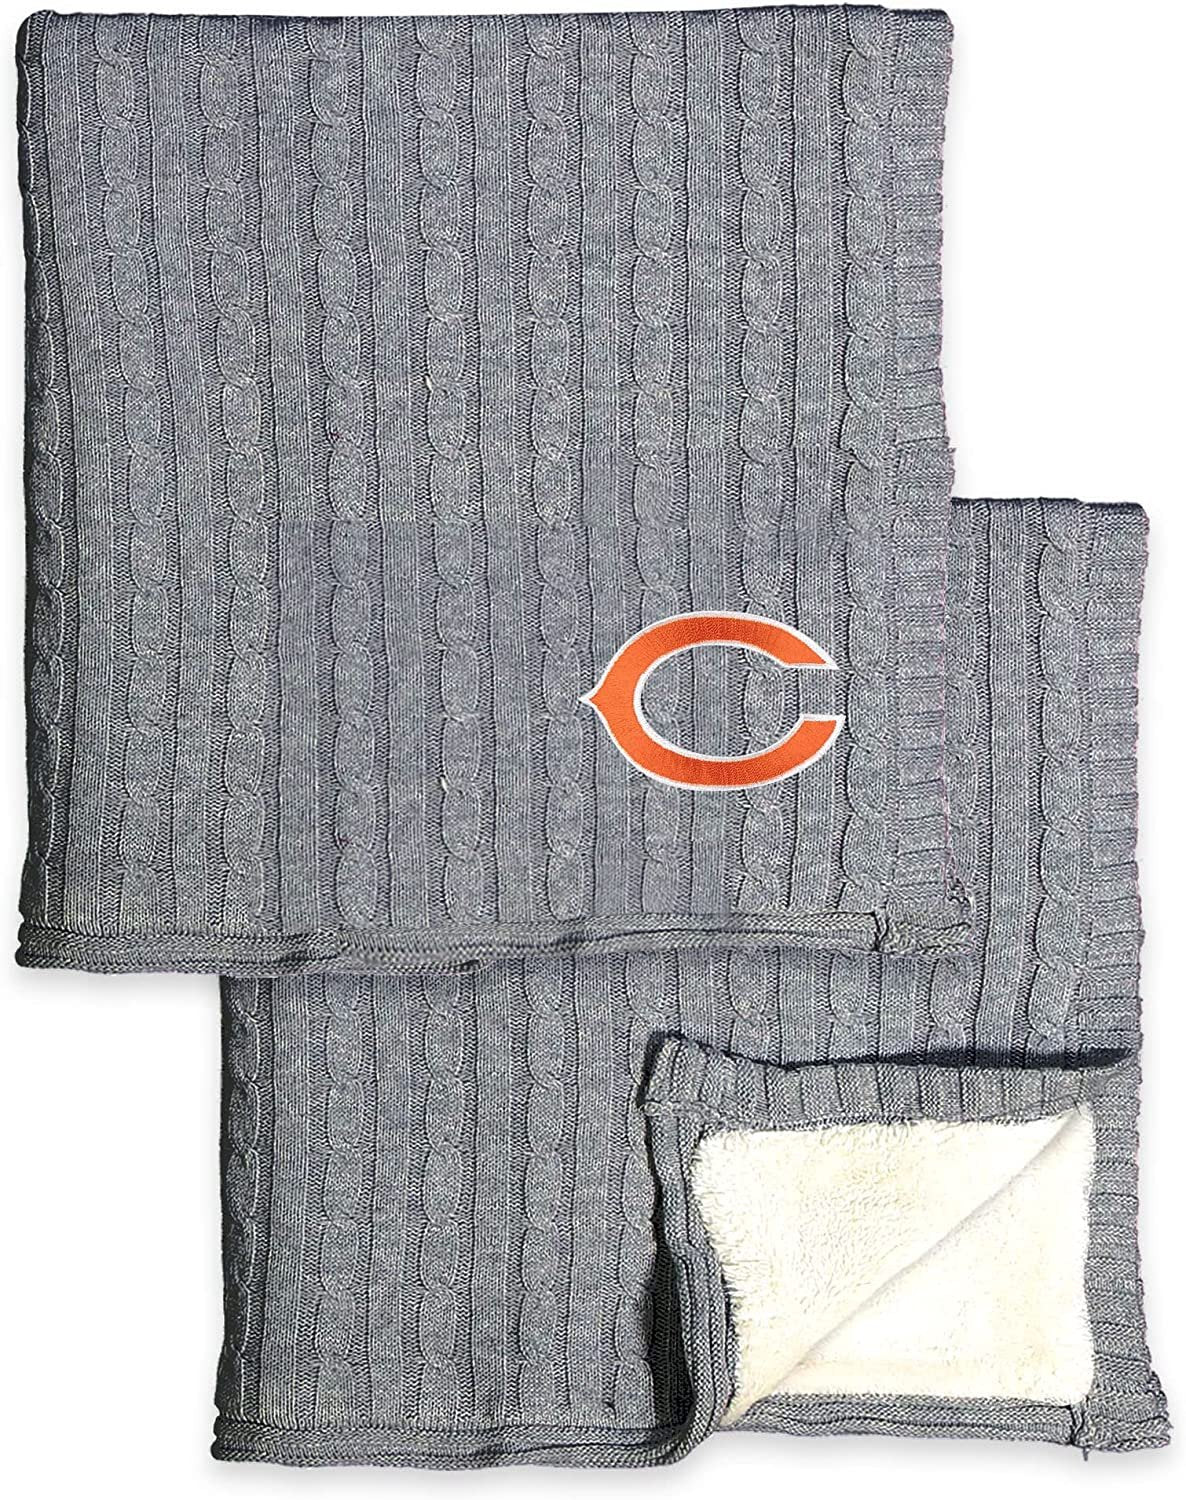 Chicago Bears Cable Sweater Knit Sherpa Throw Blanket 50x60 Inch Adult